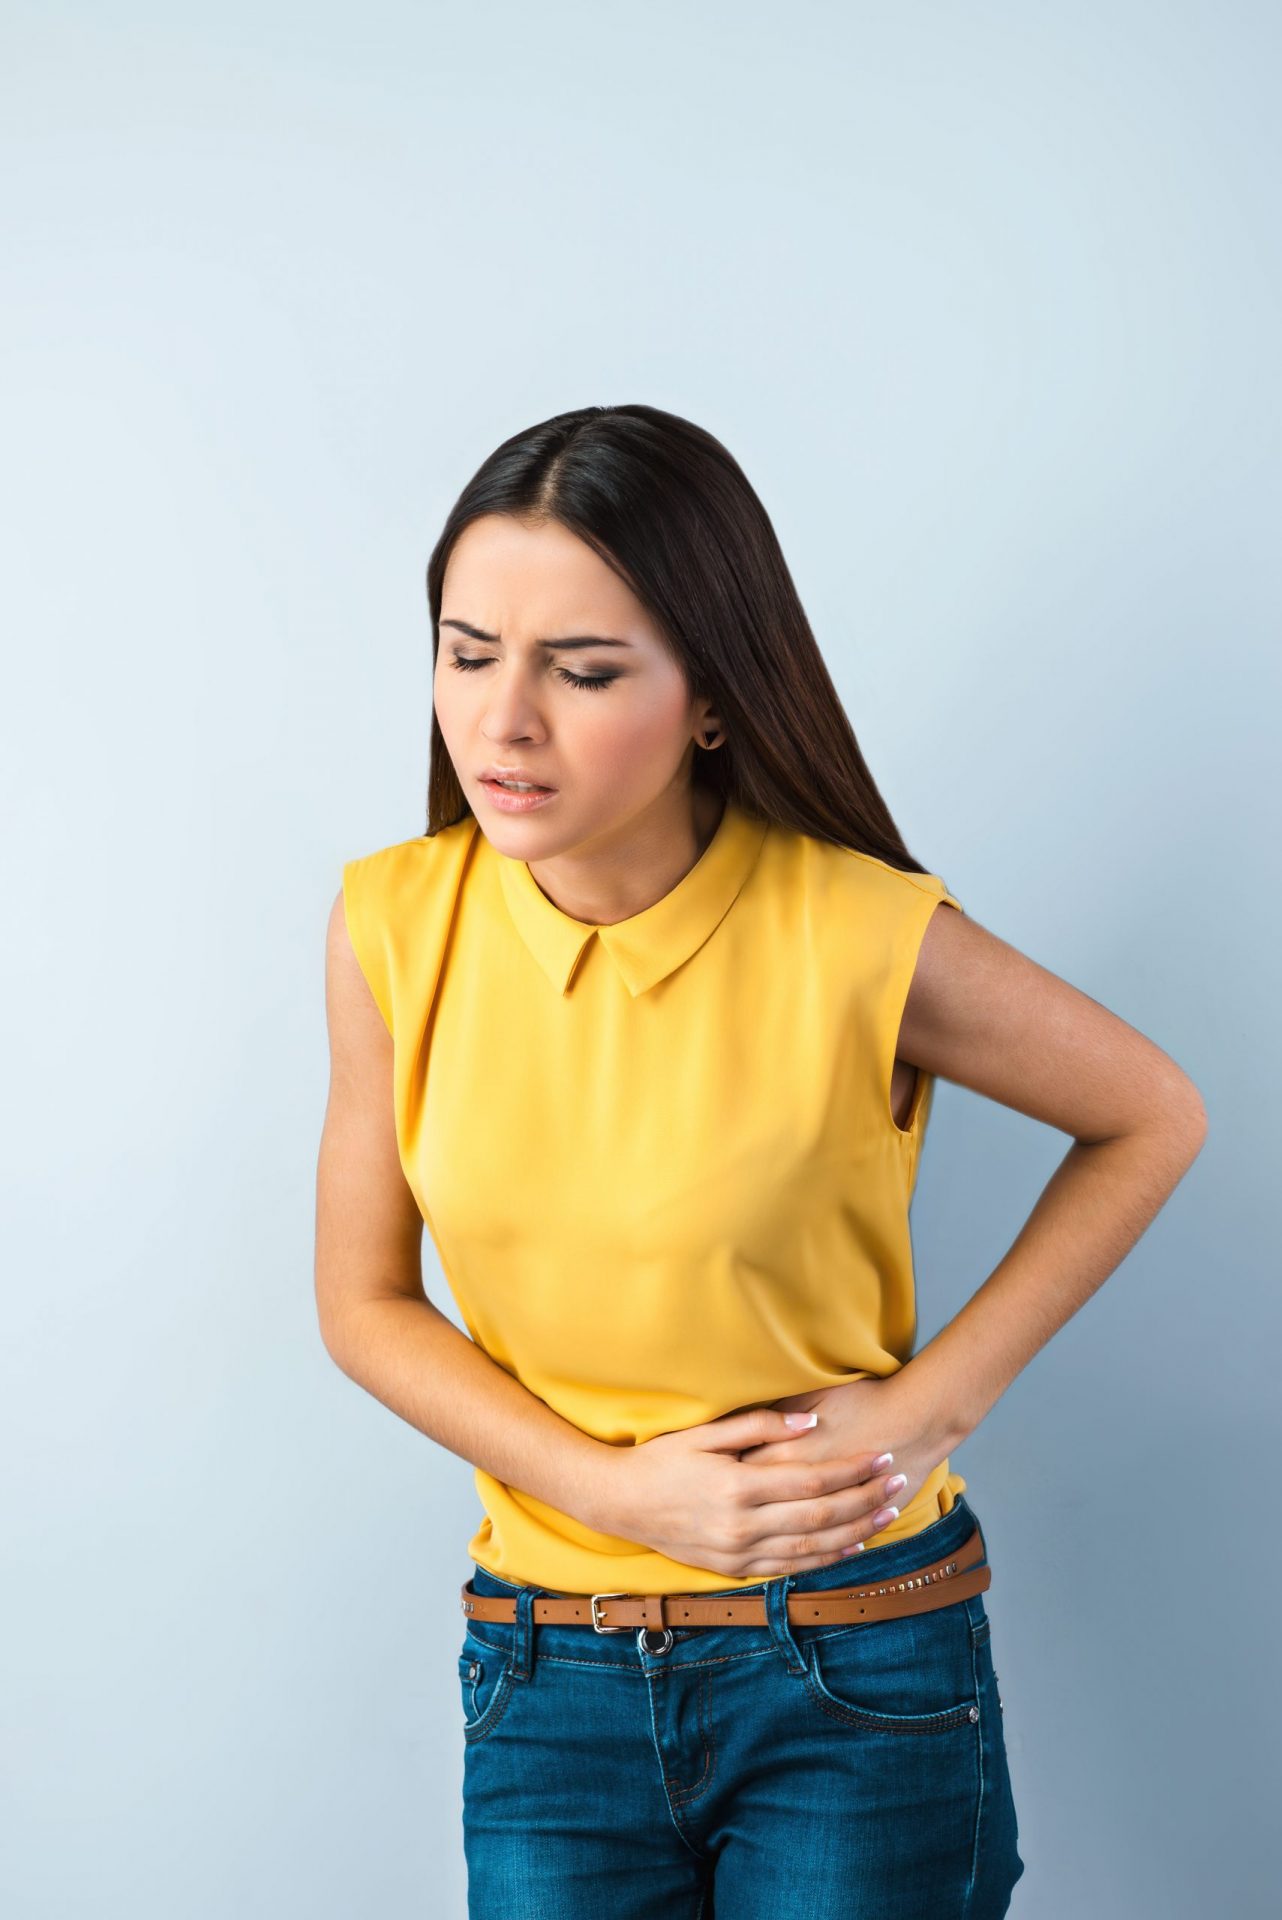 Girl-holding-her-stomach-in-pain-wearing-yellow-top-and-jeans